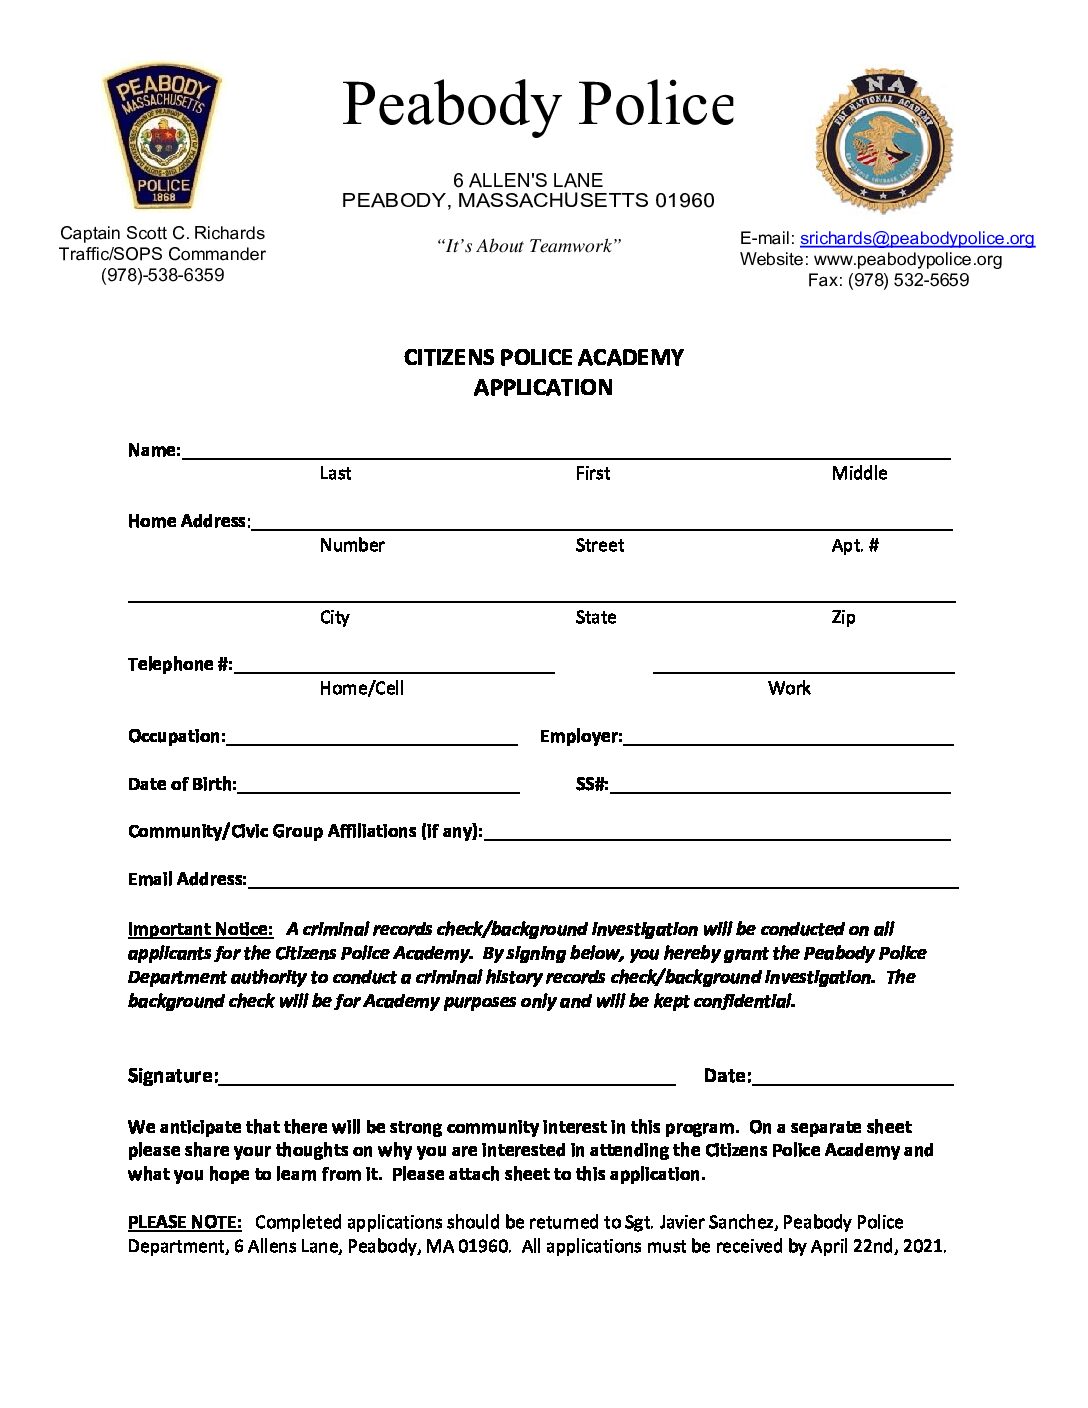 Peabody Police Citizens Academy Application